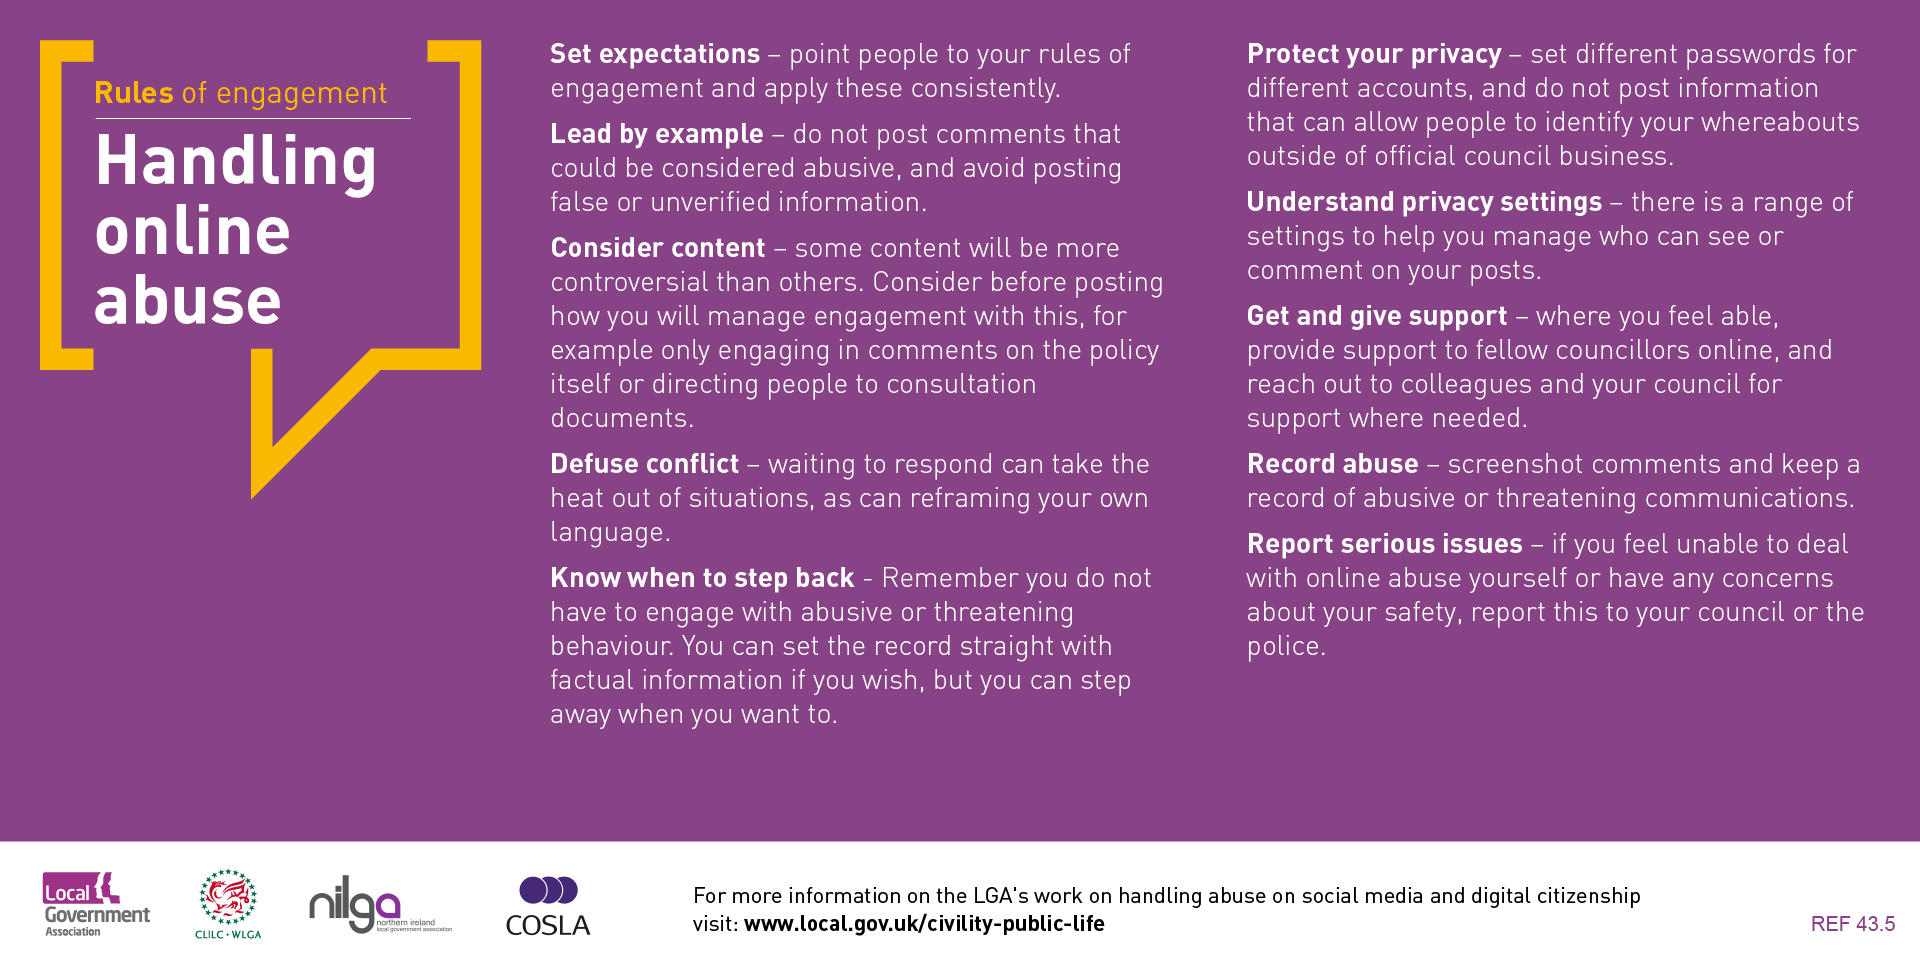 Handling online abuse, the rules of engagement. Below this image are further details of the text.